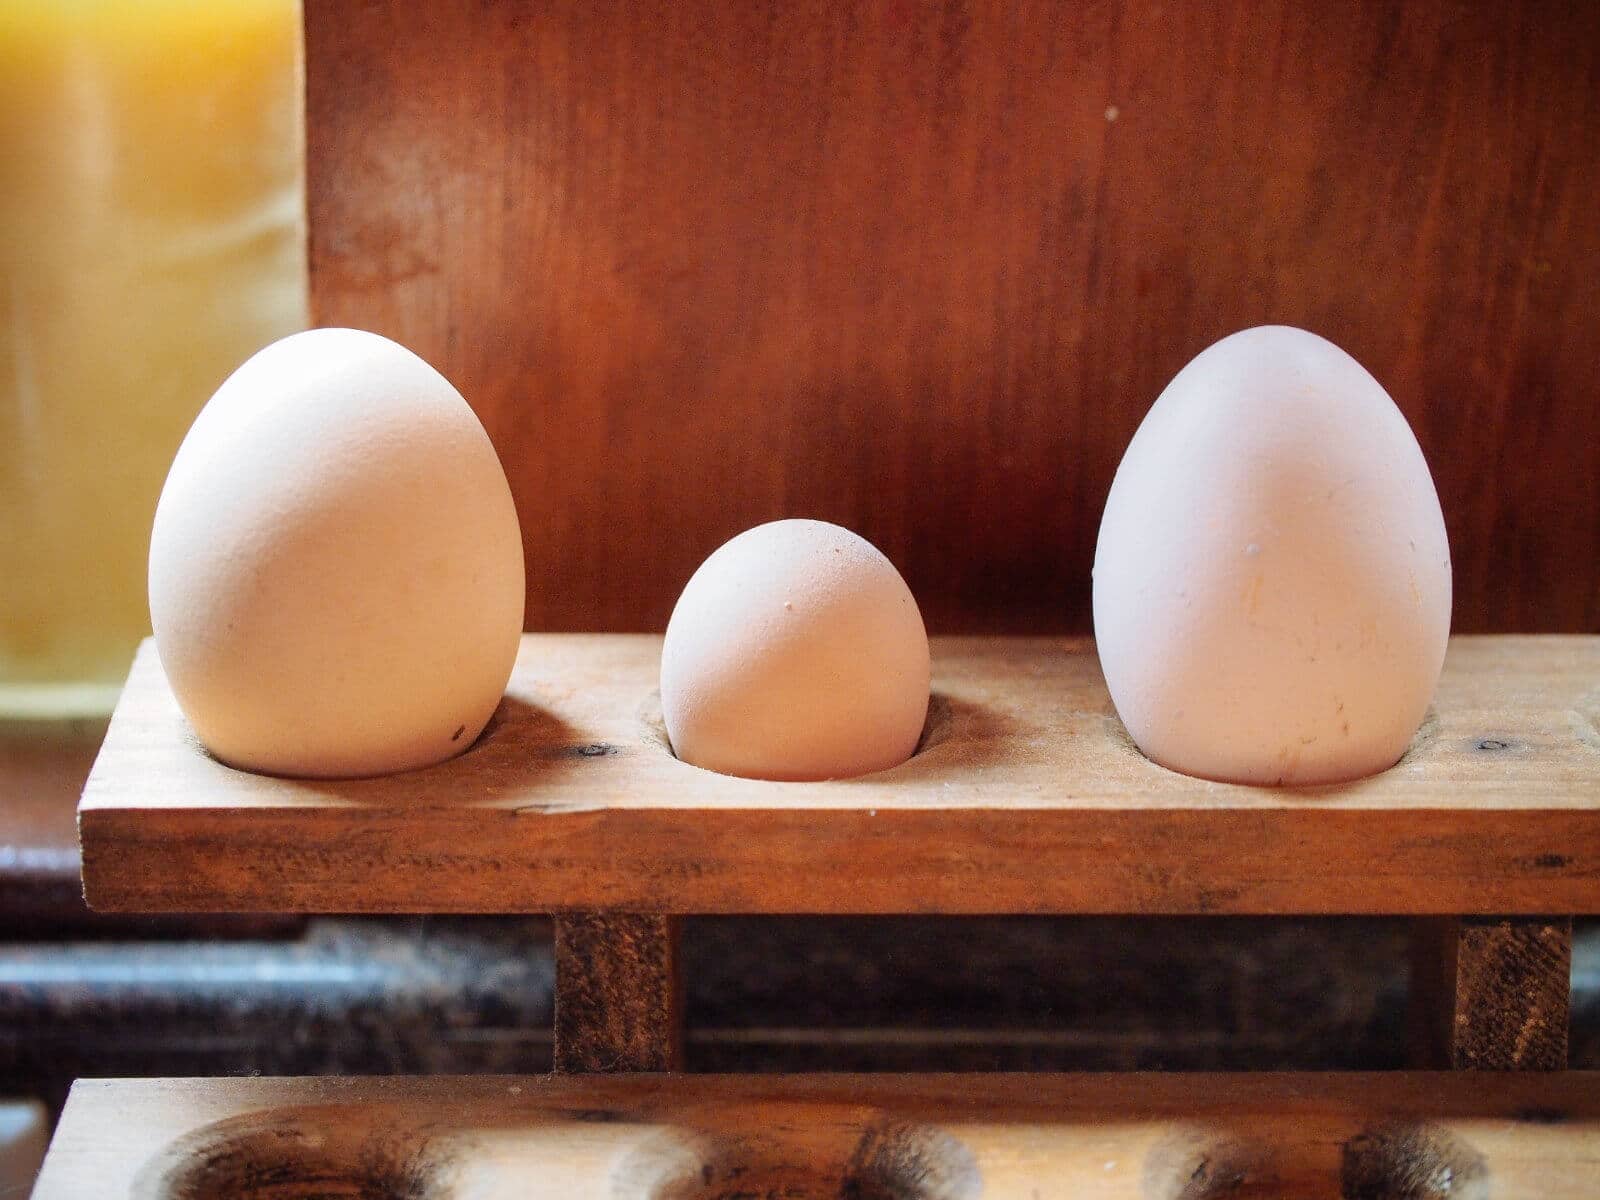 A fairy egg compared to large chicken eggs